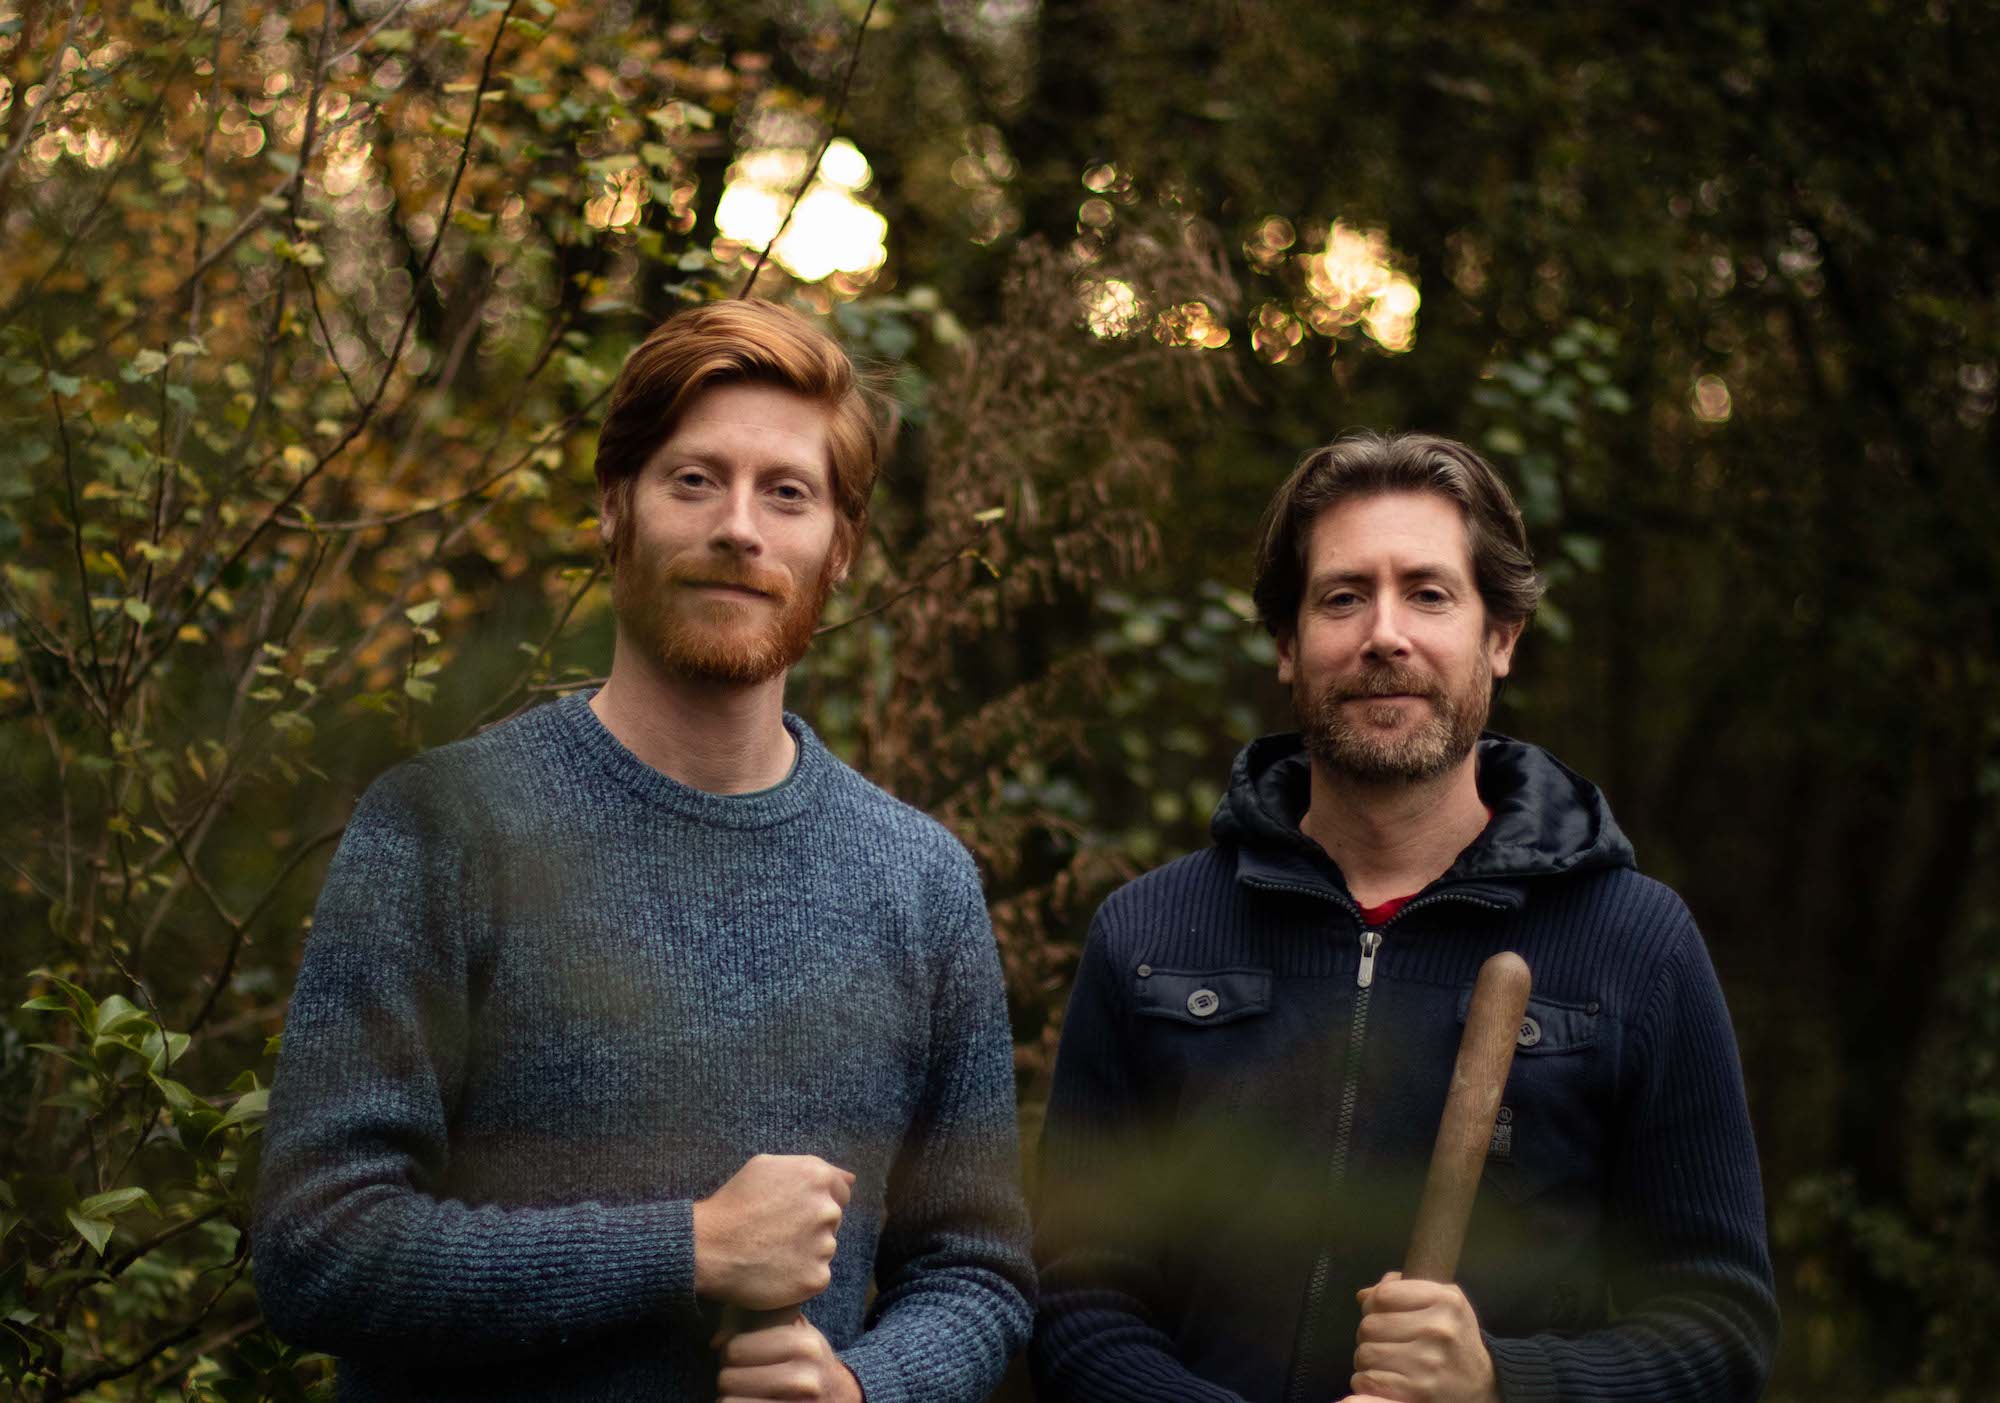 Living Woodlands was created by brothers Colm and John Galvin who want to transform forestry plantations into community woodlands